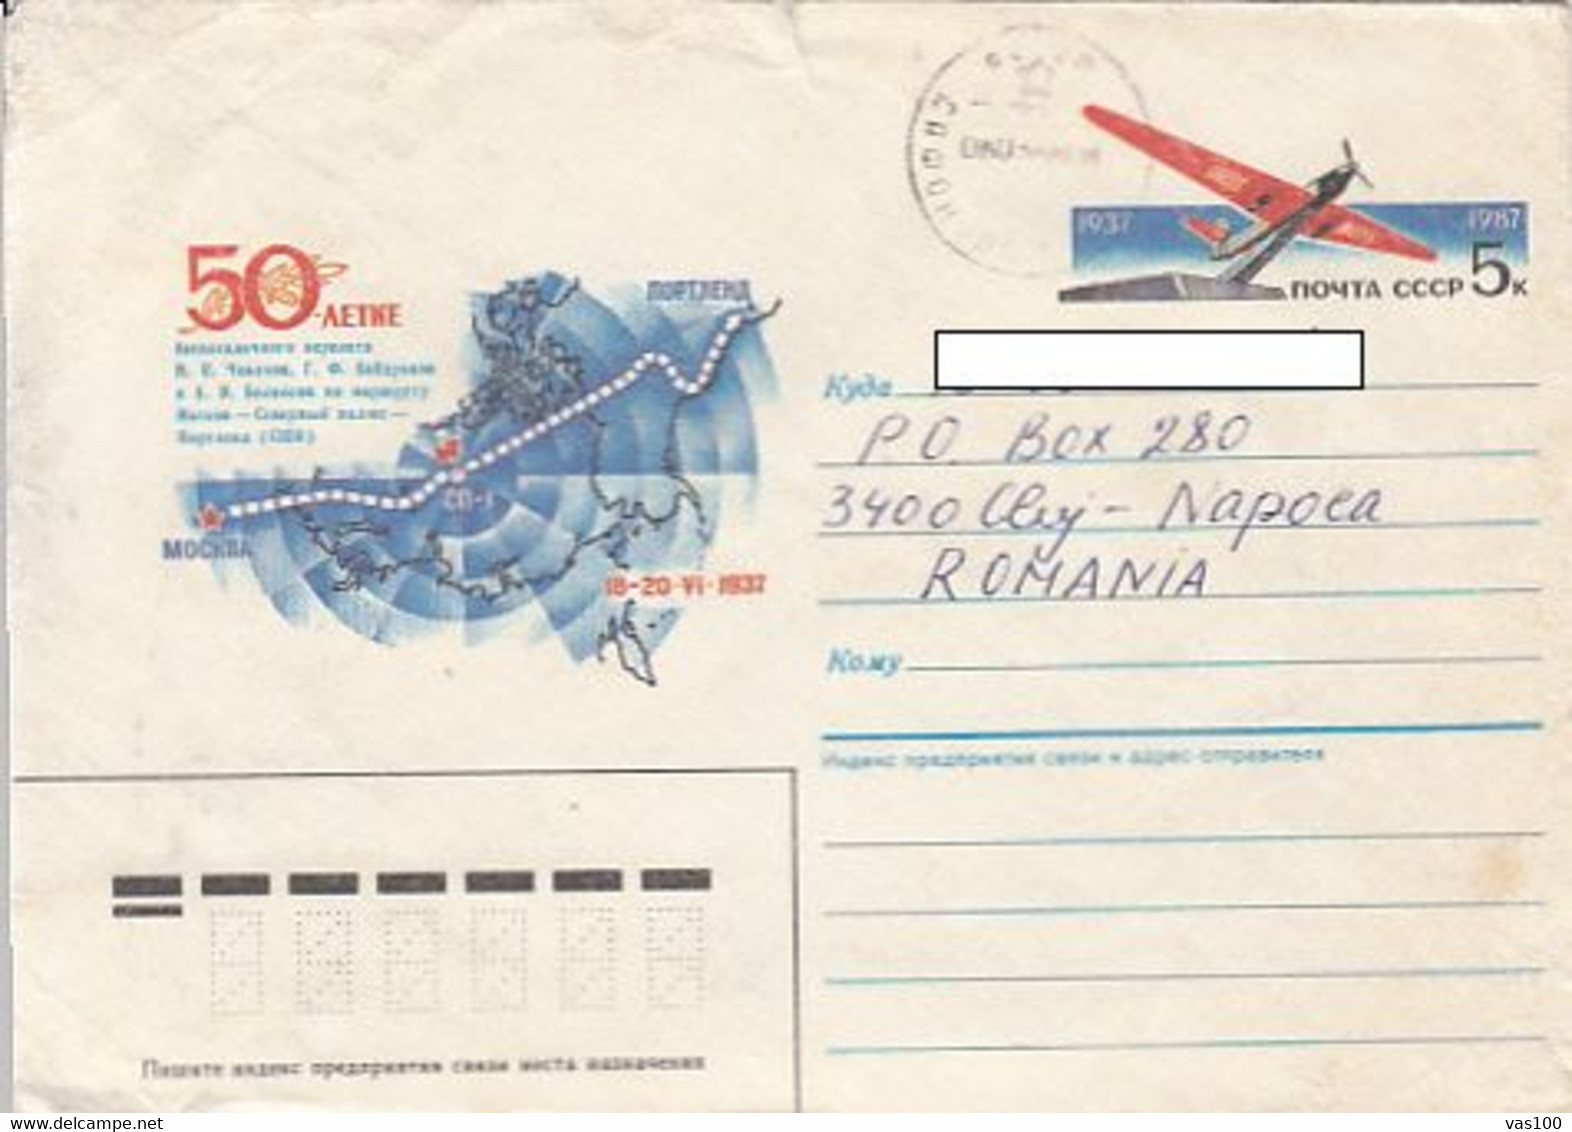 POLAR FLIGHTS, 1937 MOSCOW- PORTLAND FLIGHT OVER NORTH POLE, COVER STATIONERY, ENTIER POSTAL, 1988, RUSSIA - Vols Polaires